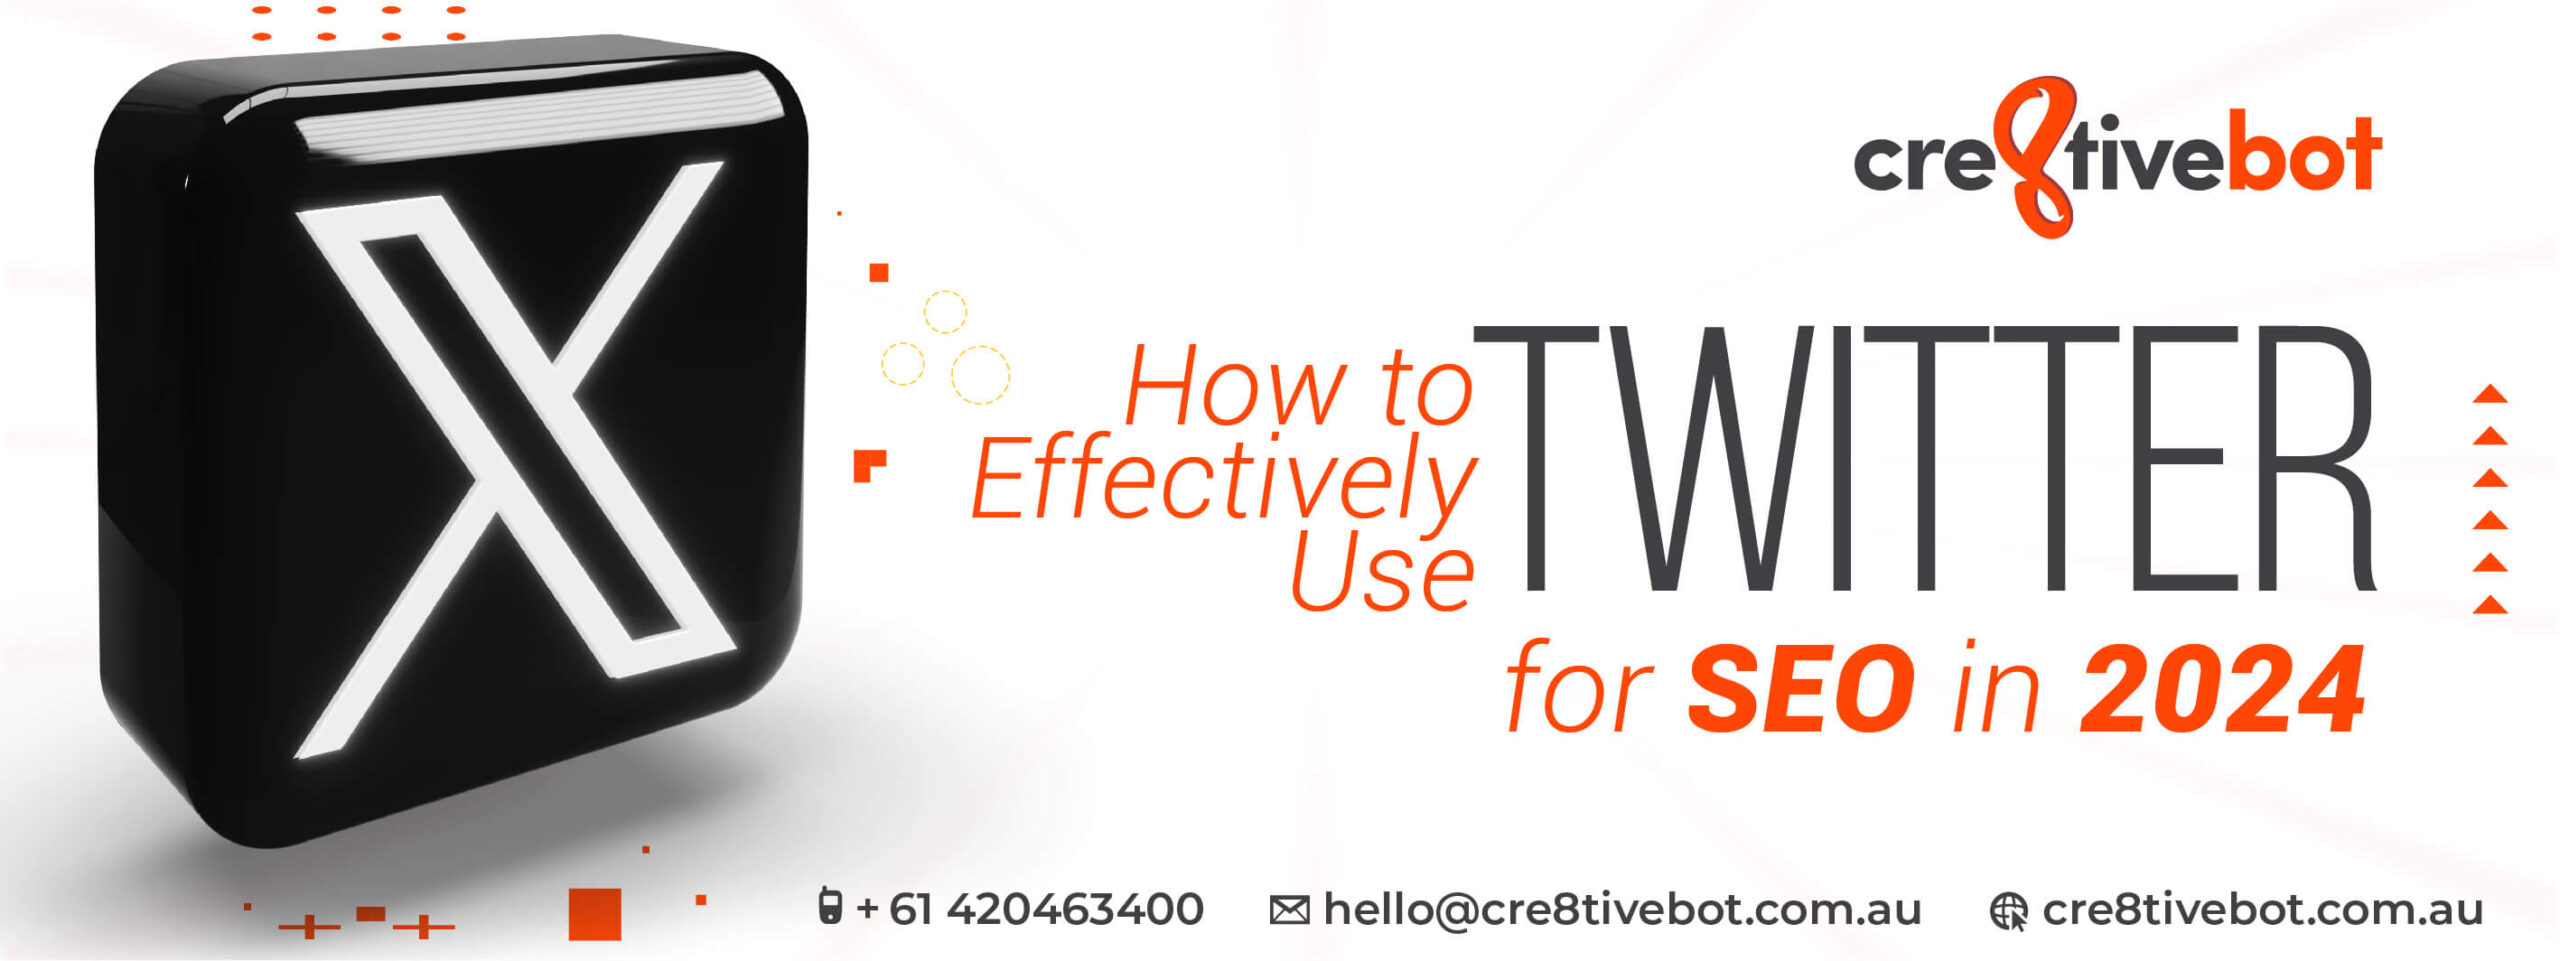 How to effectively use Twitter for SEO in 2024